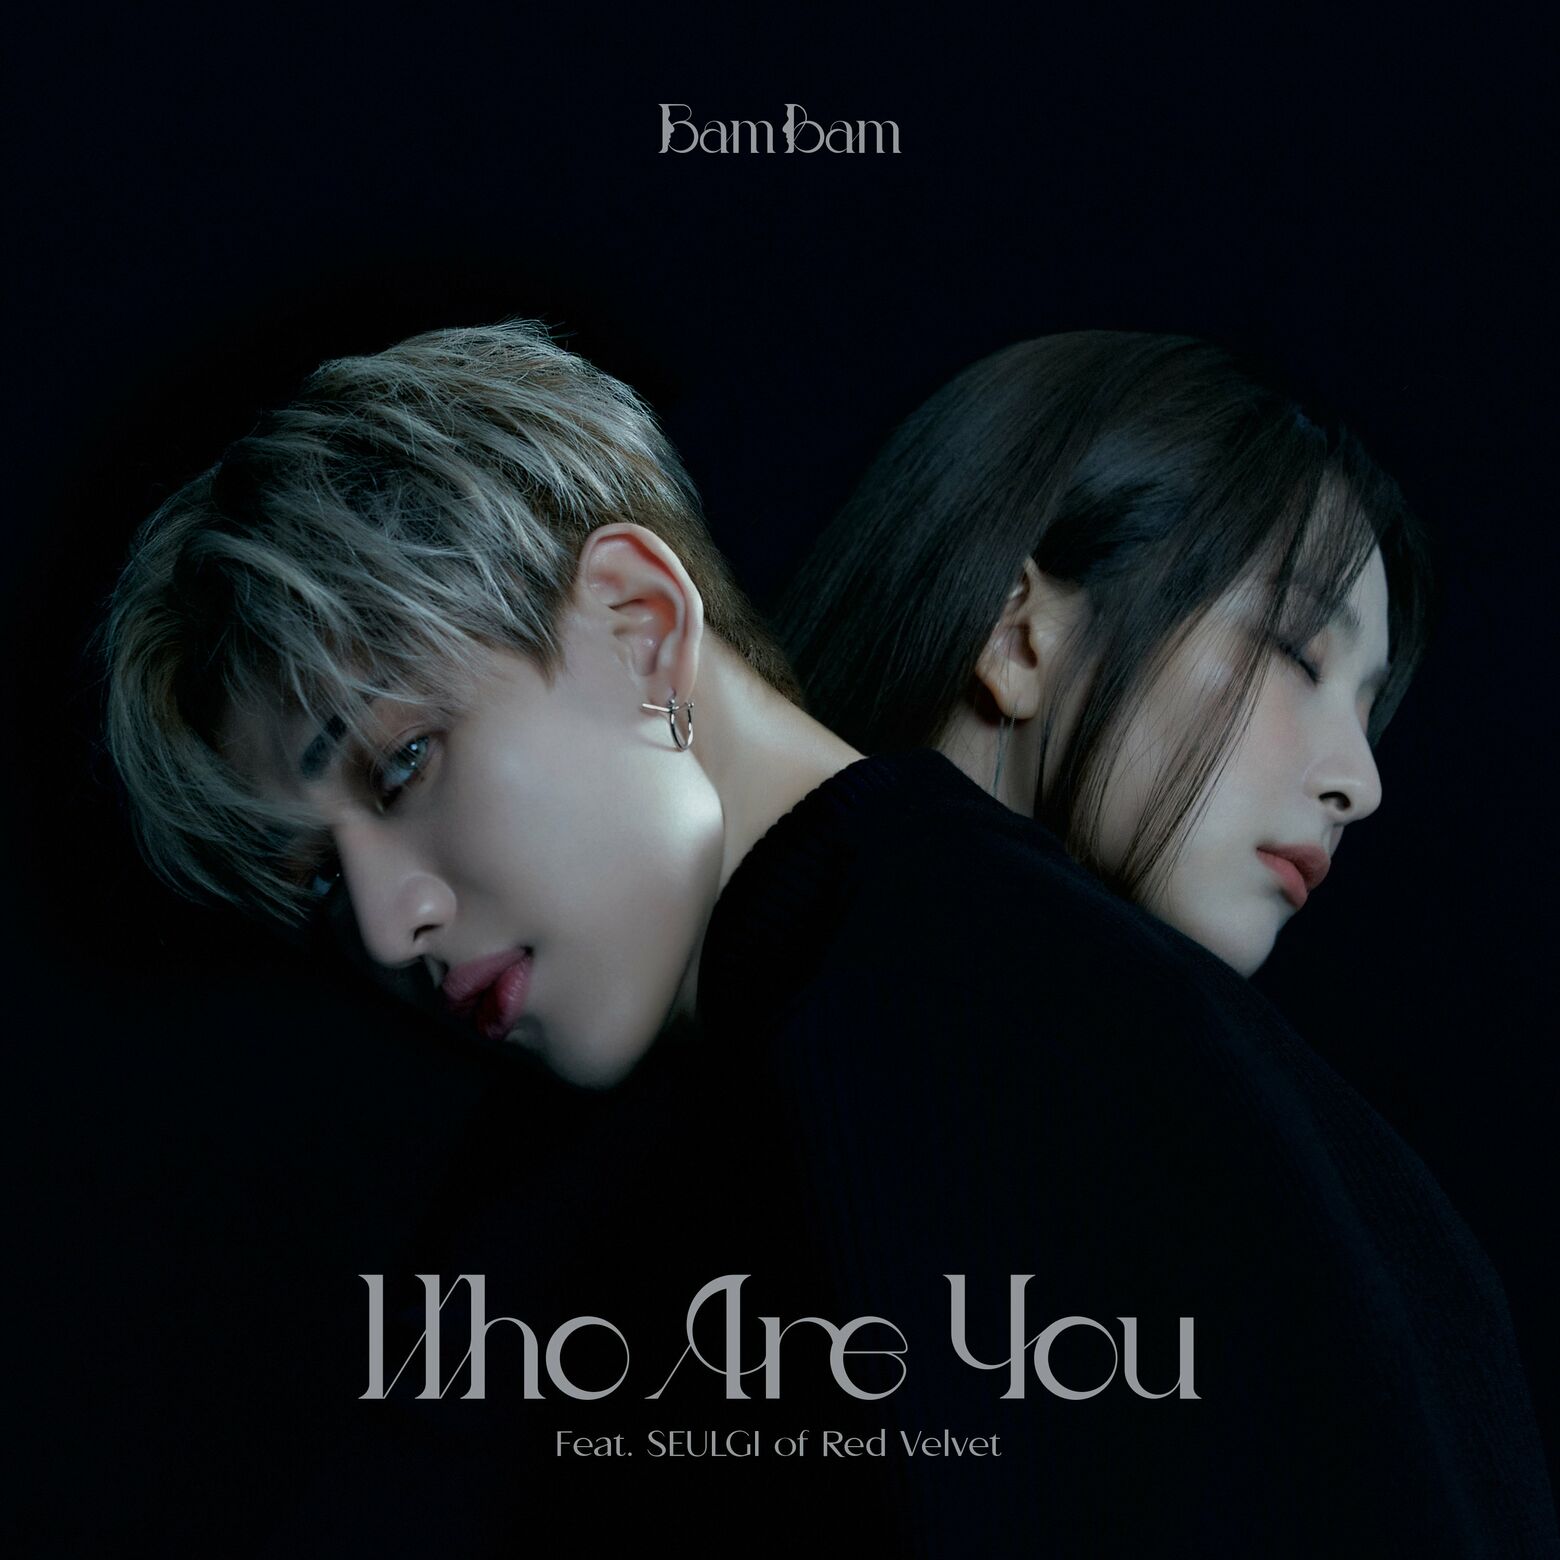 BamBam – Who Are You (Feat. SEULGI of Red Velvet) – Single